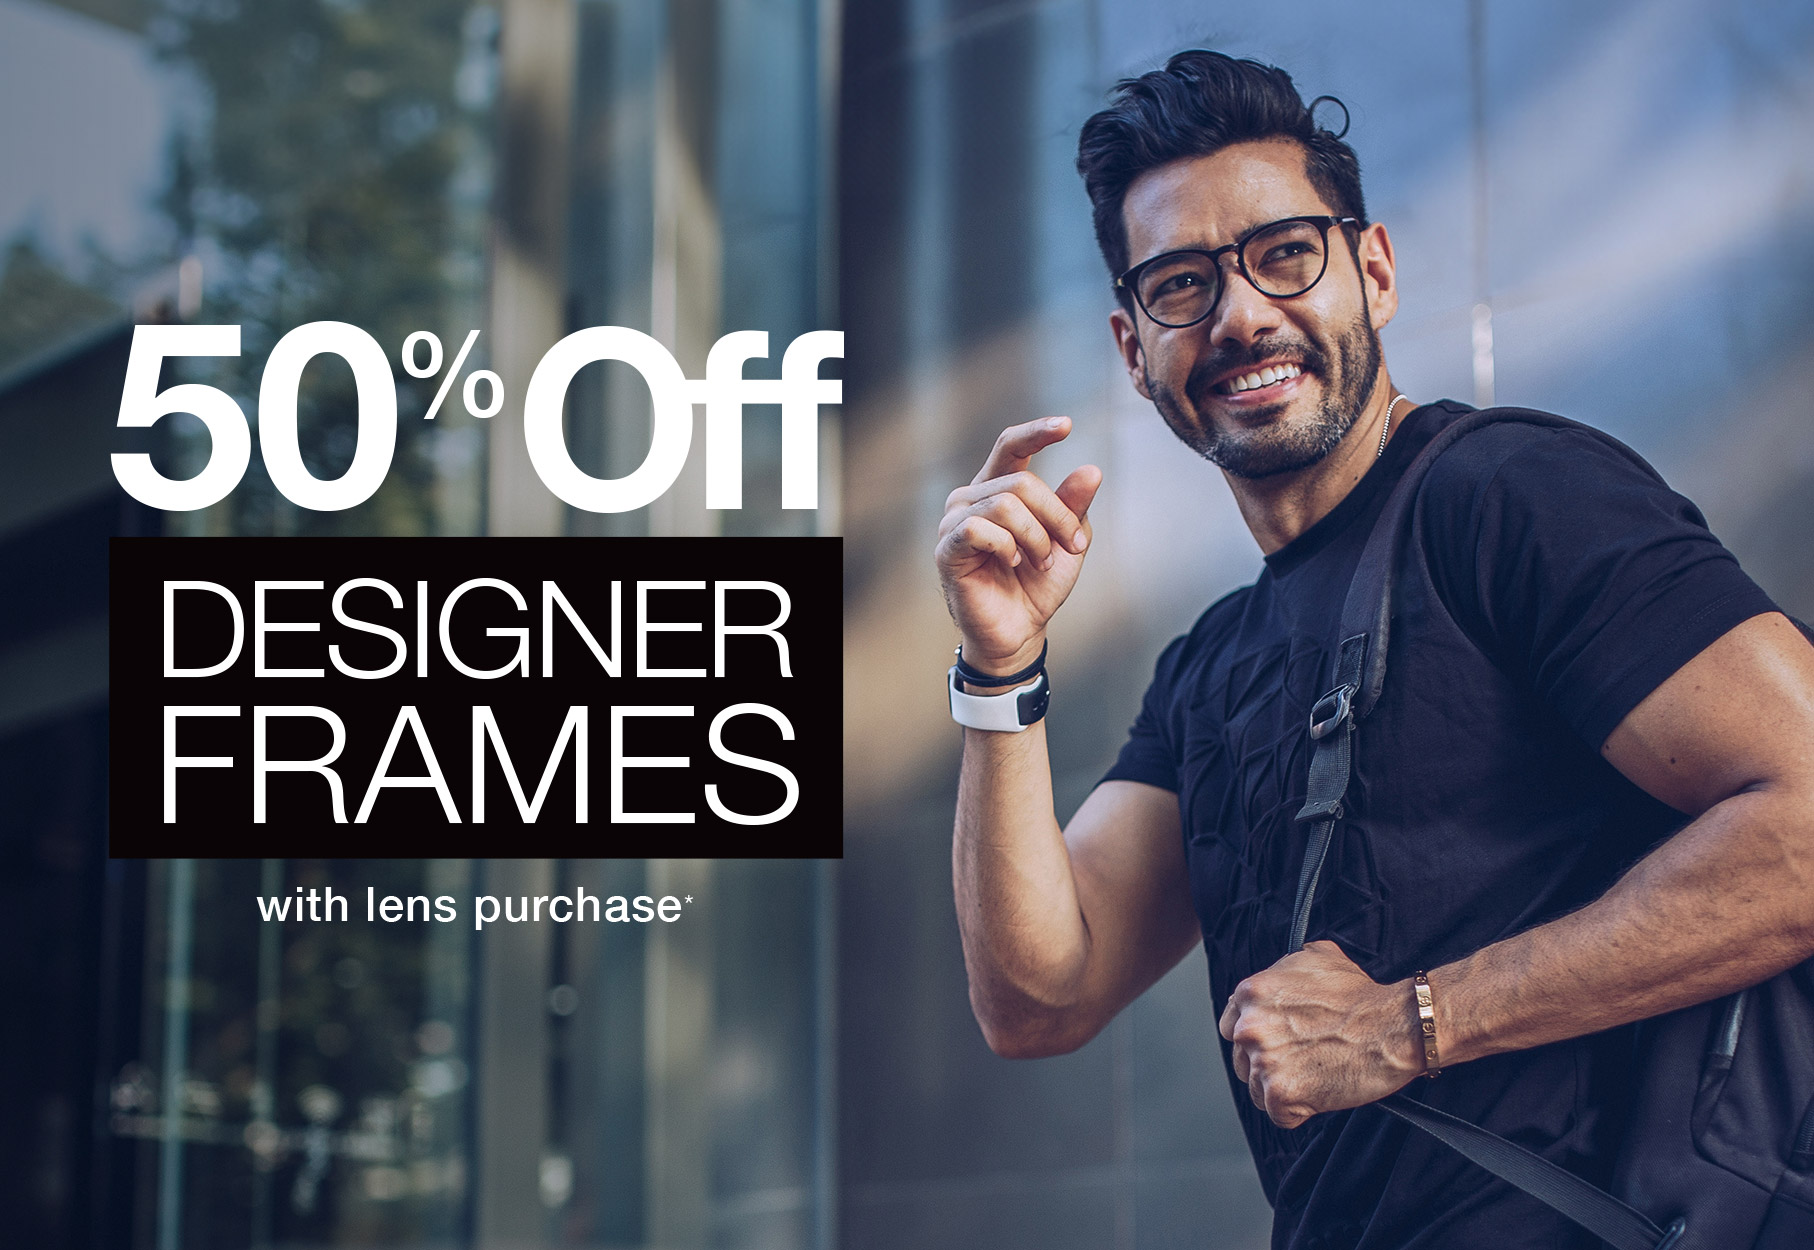 Text: 50% off designer frames with lens purchase* Photo: smiling man wearing eyeglasses and a black t-shirt with a backpack over his shoulder